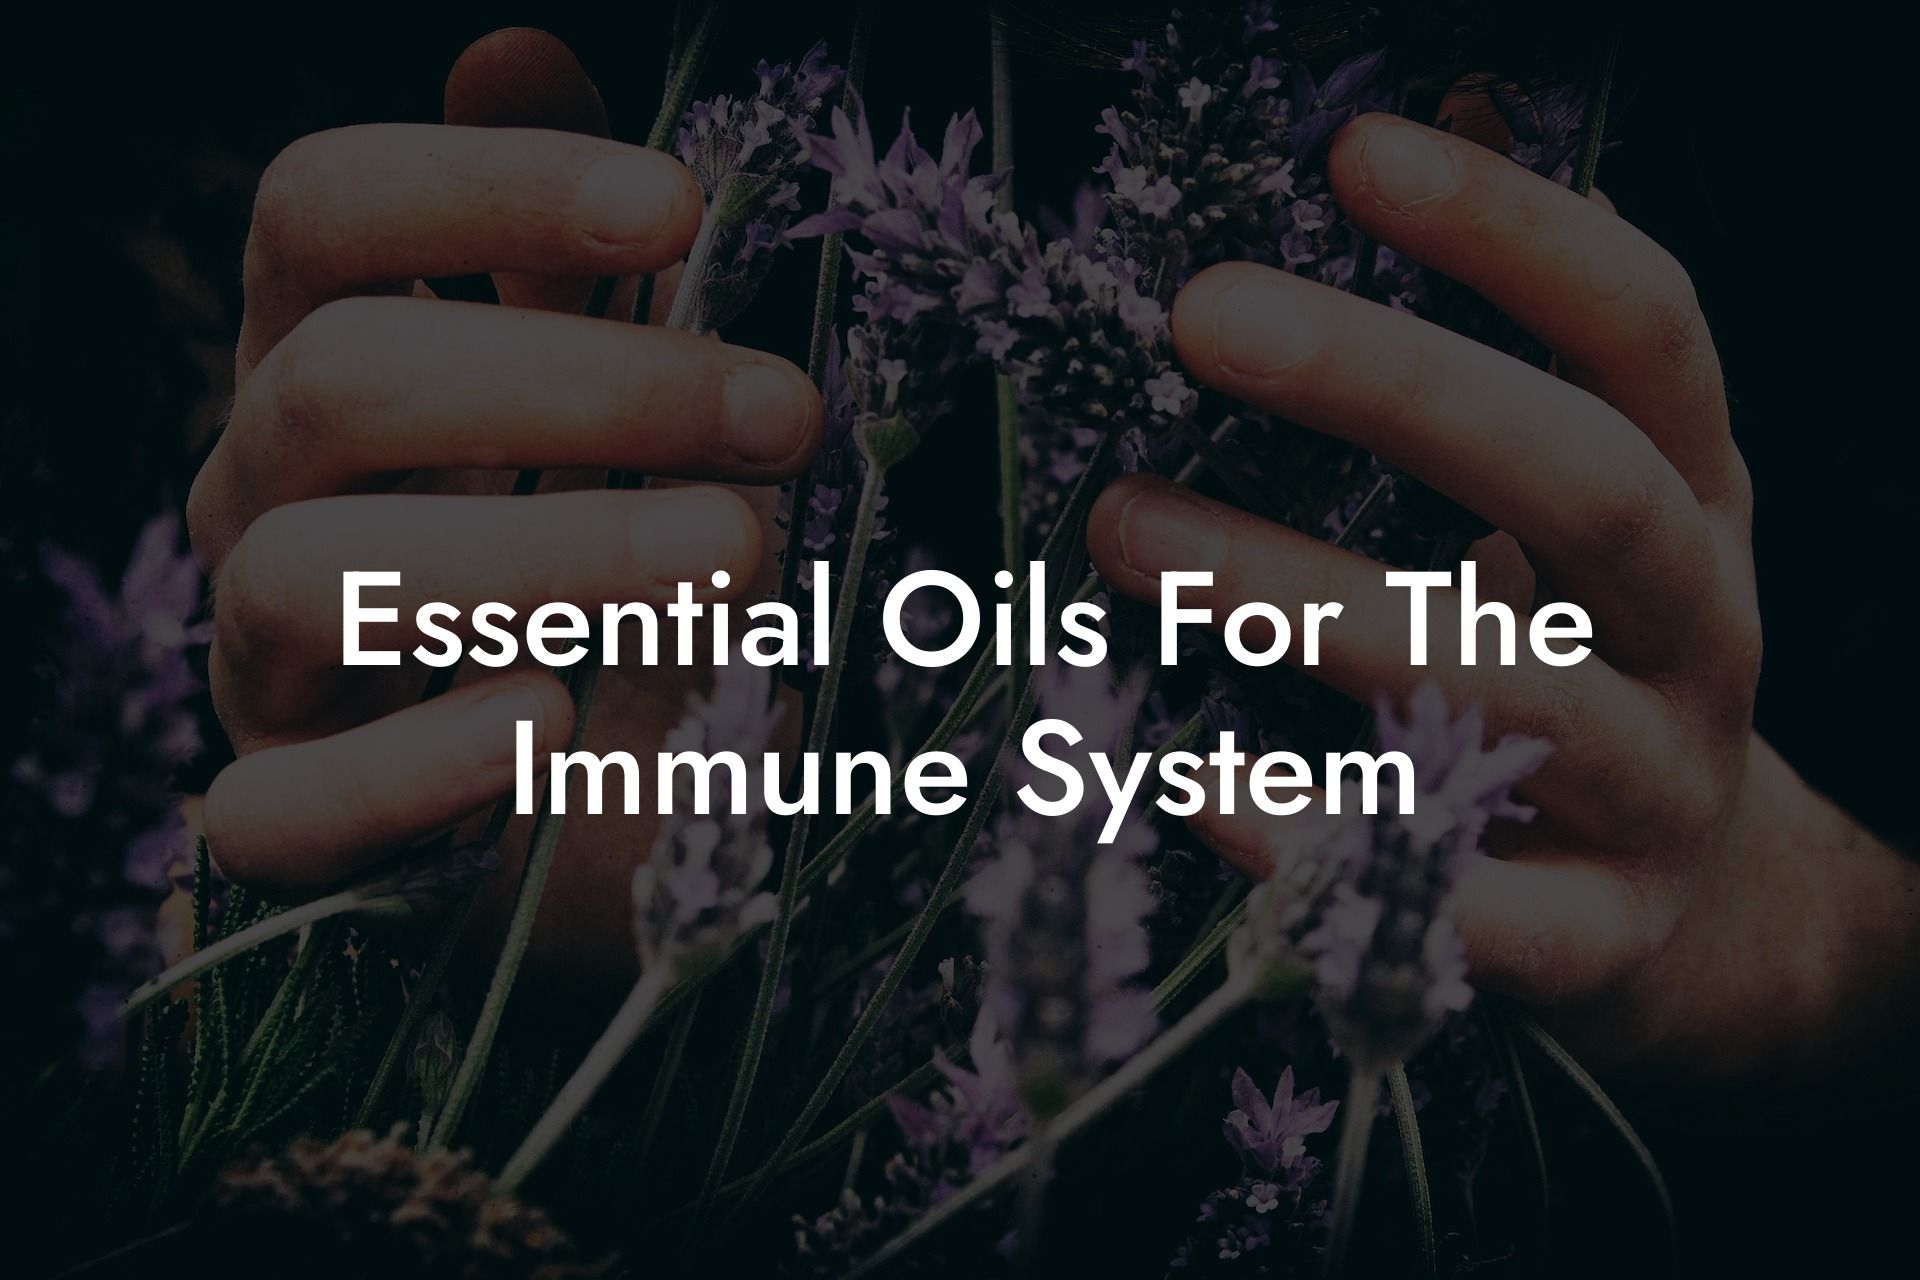 Essential Oils For The Immune System